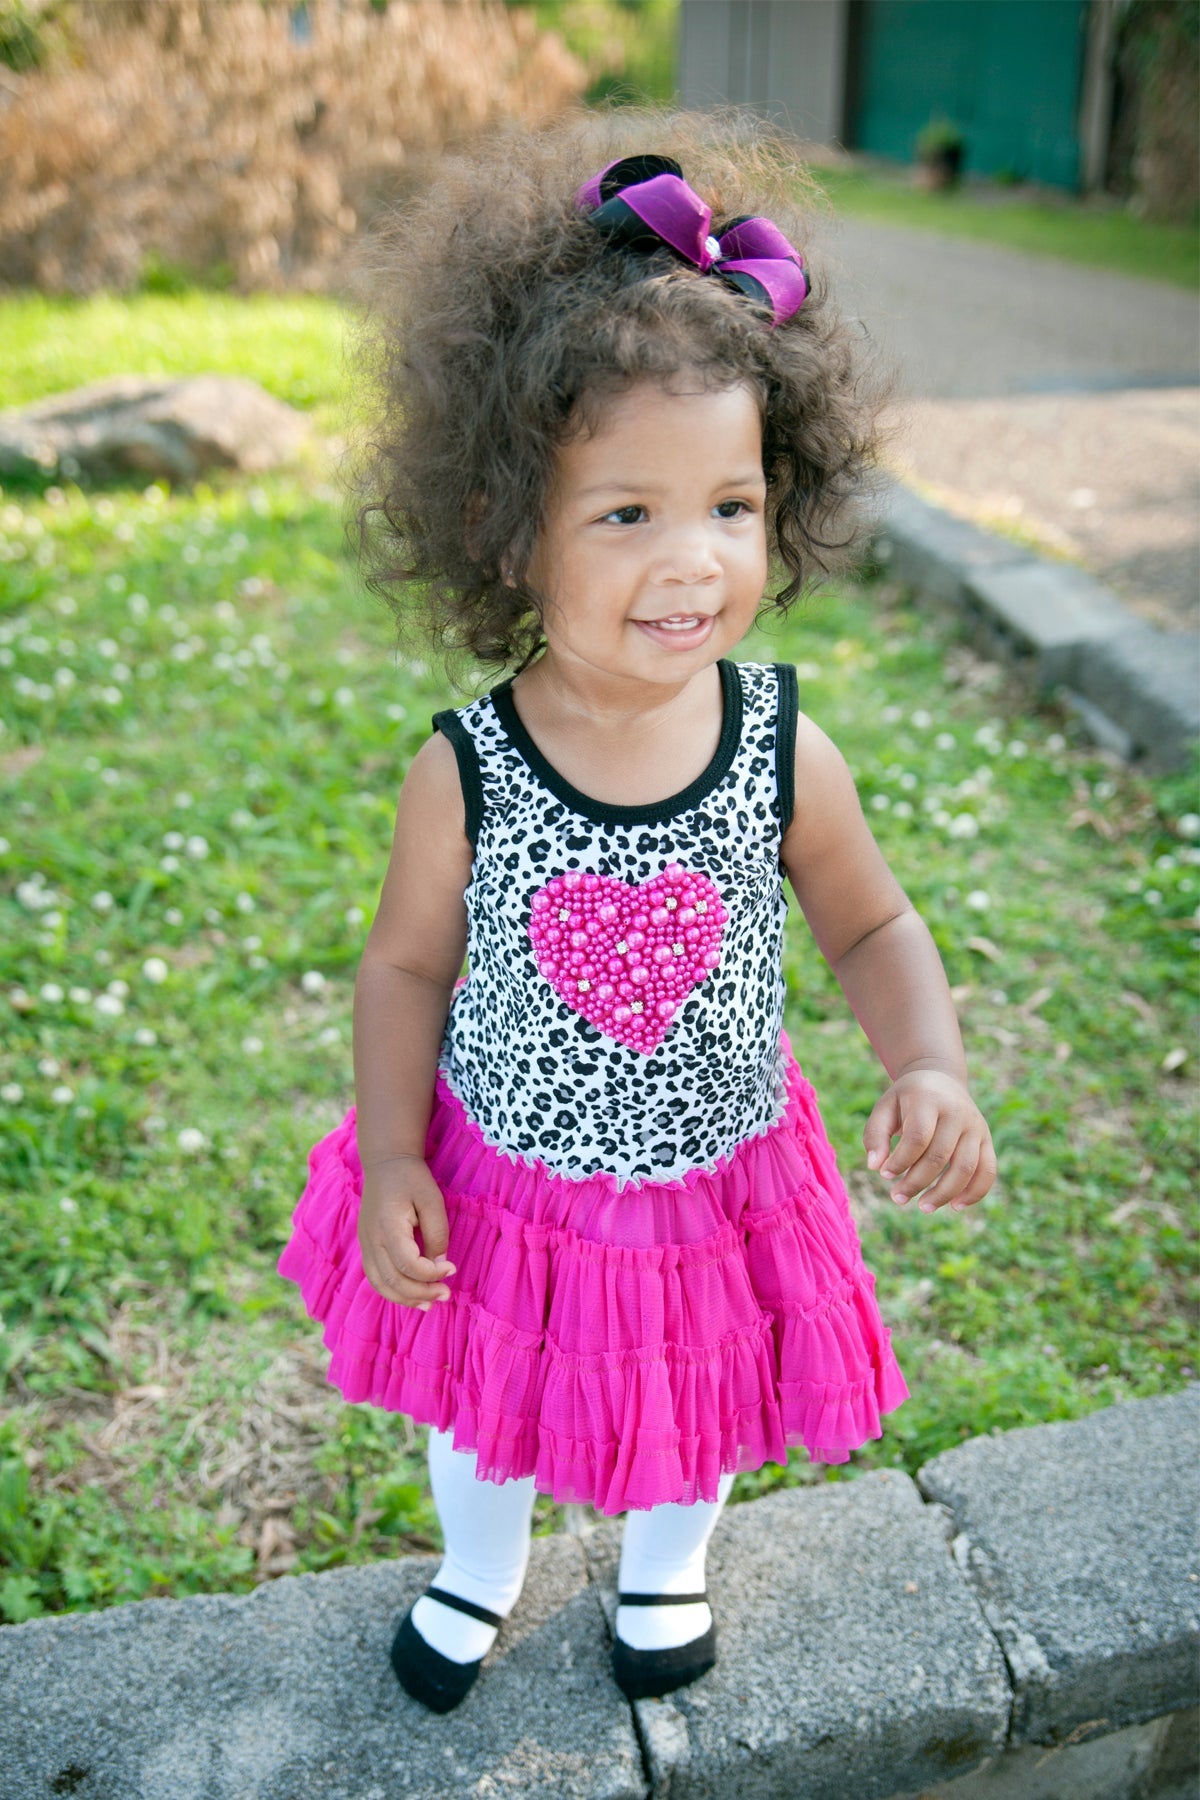 Little girl in hot pink dress with Mary Jane shoe look tights